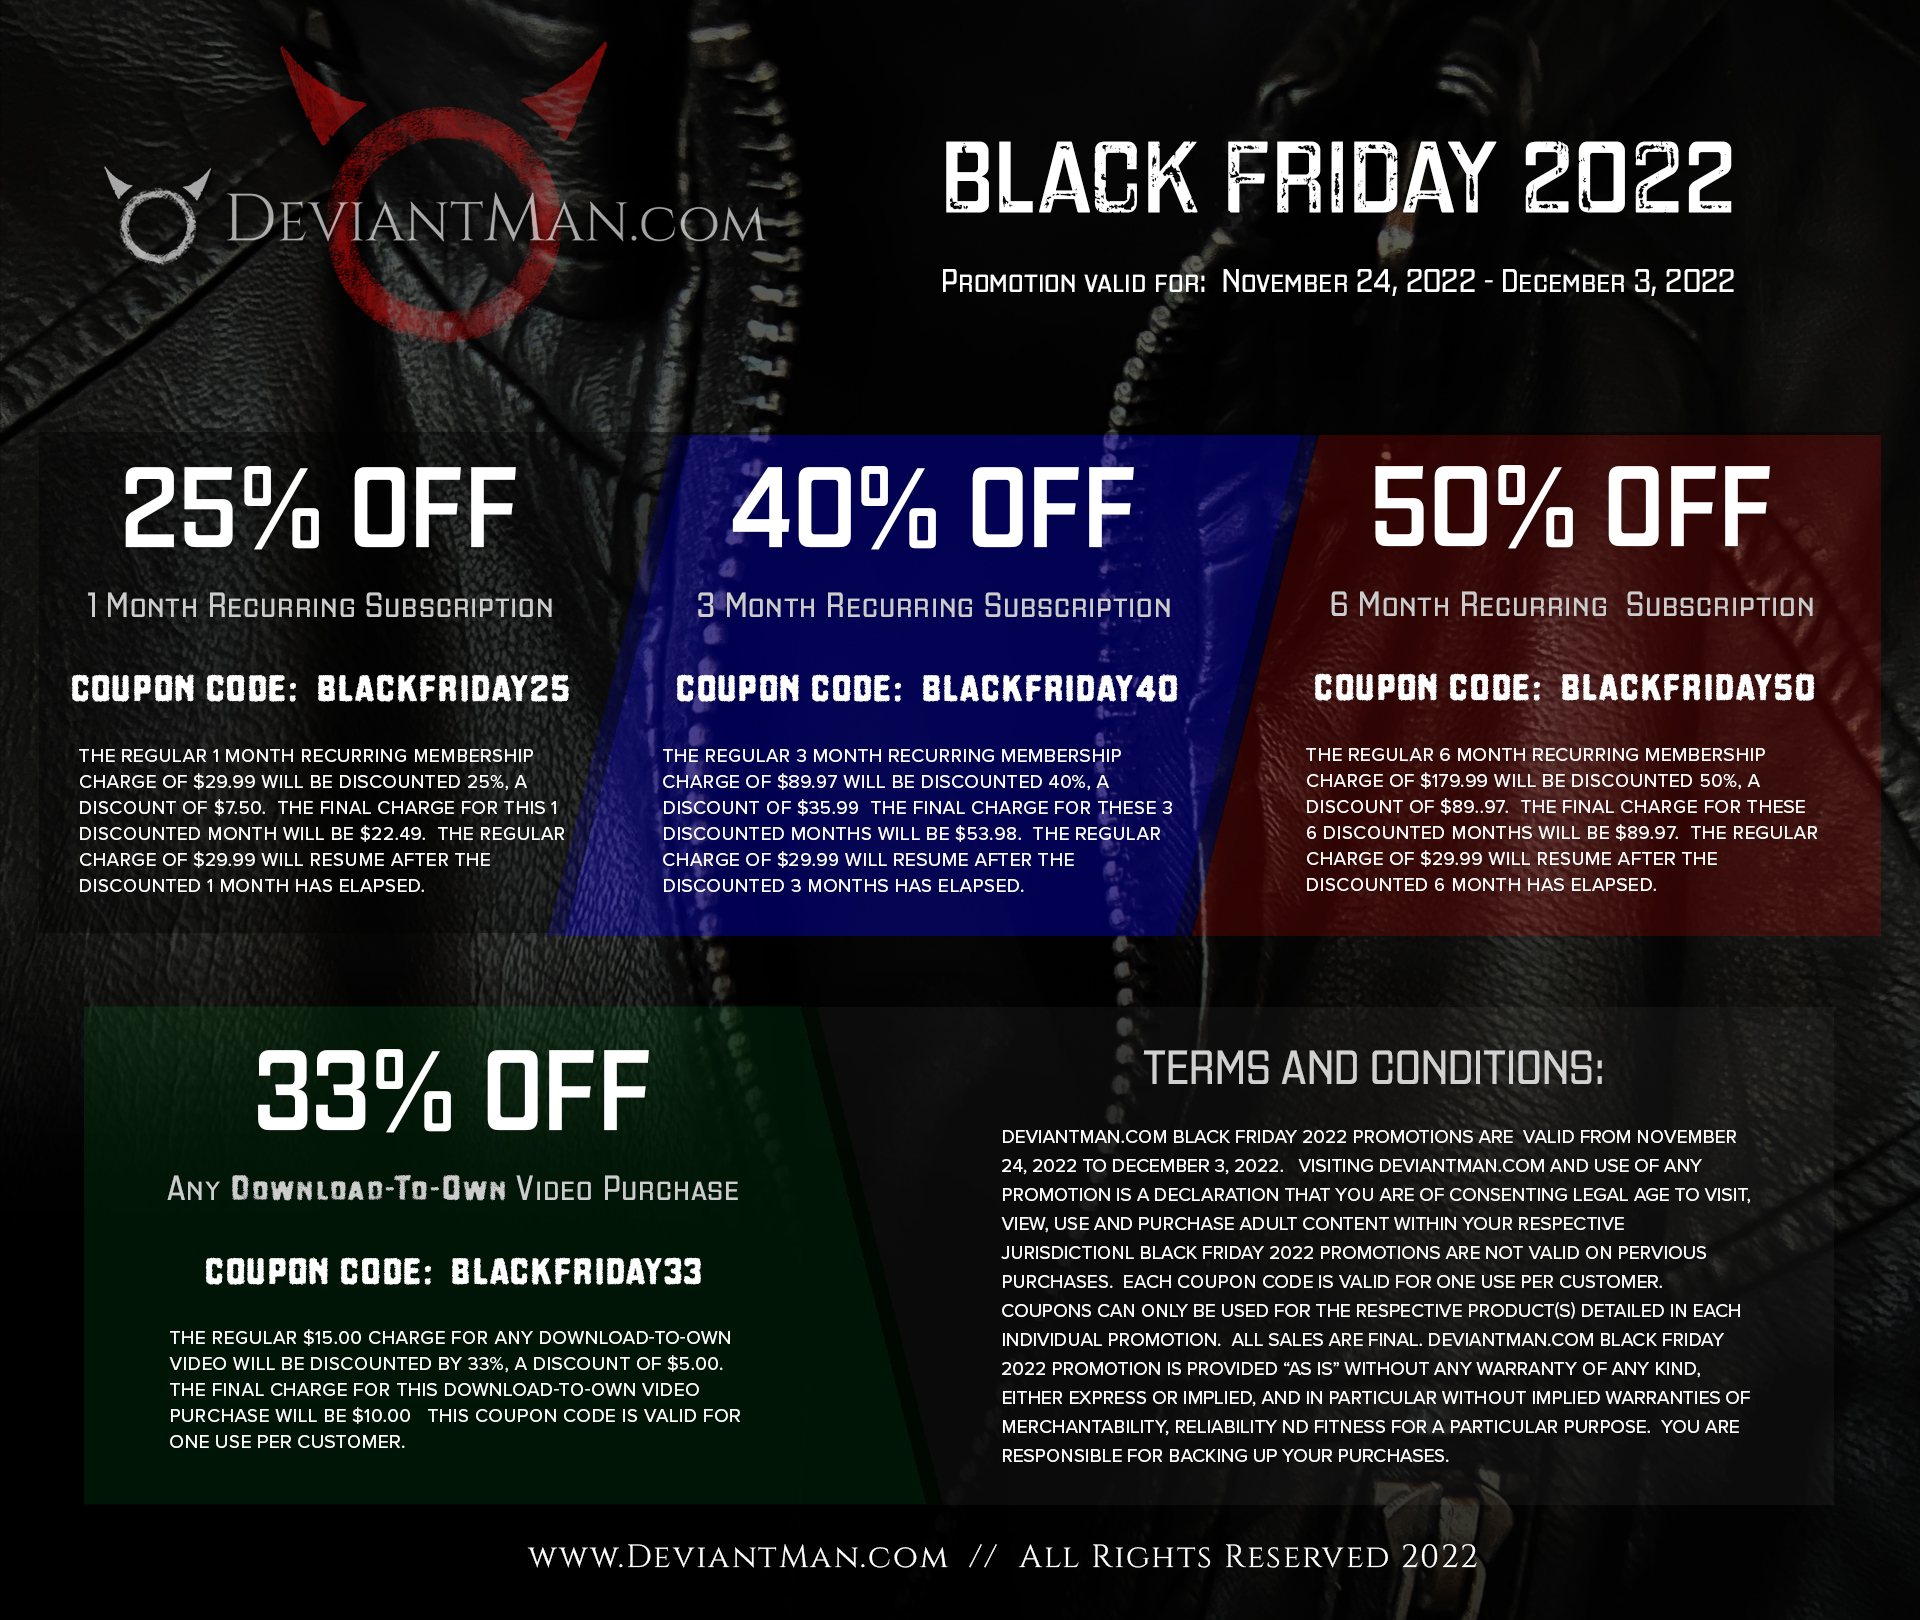 DeviantMan.com Black Friday 2022 Subscription and Download-To-Own Promotion